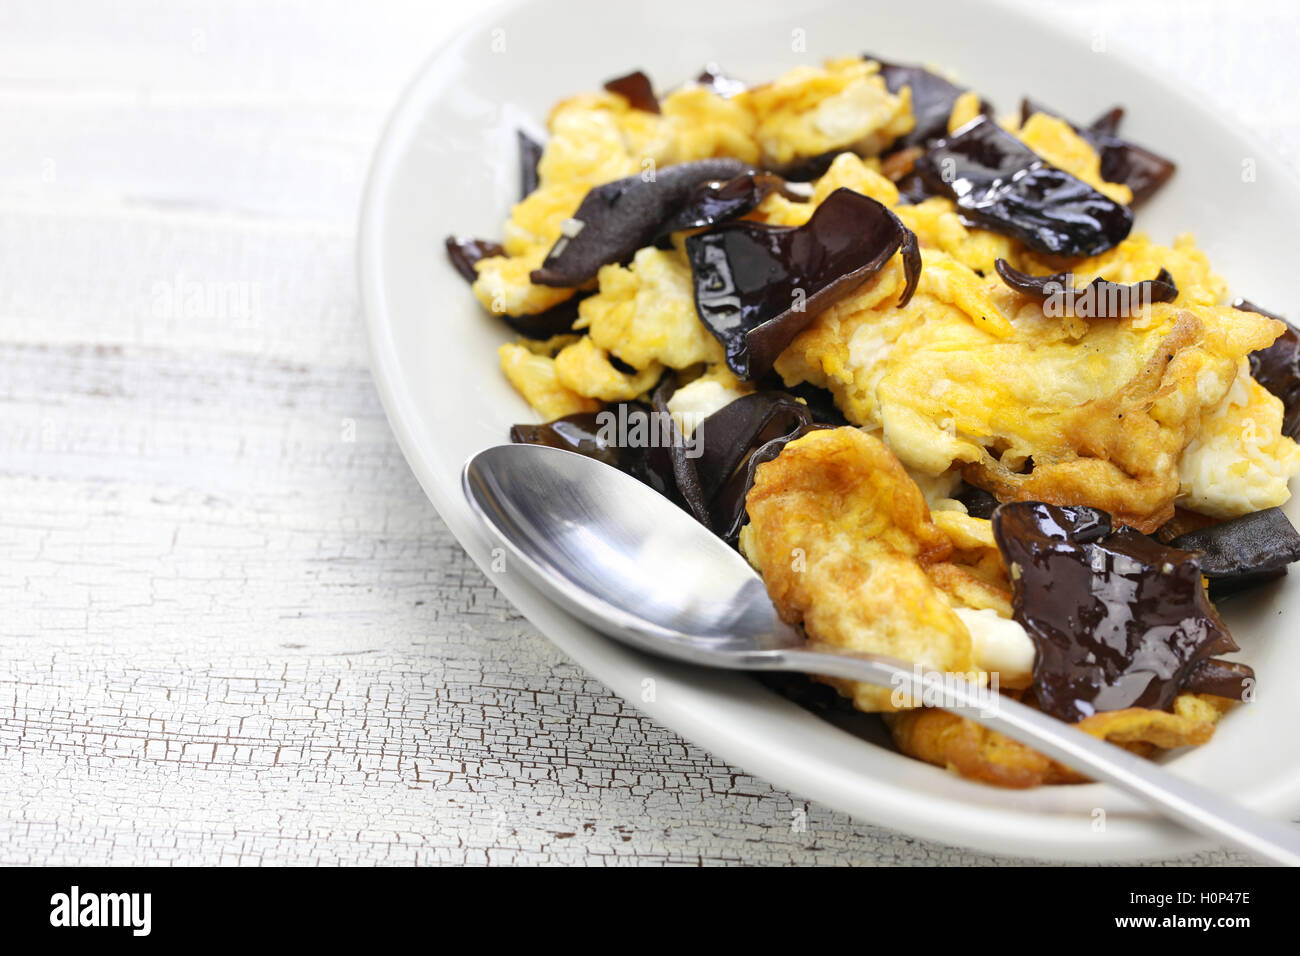 stir fried eggs with wood ear mushrooms, chinese cuisine Stock Photo